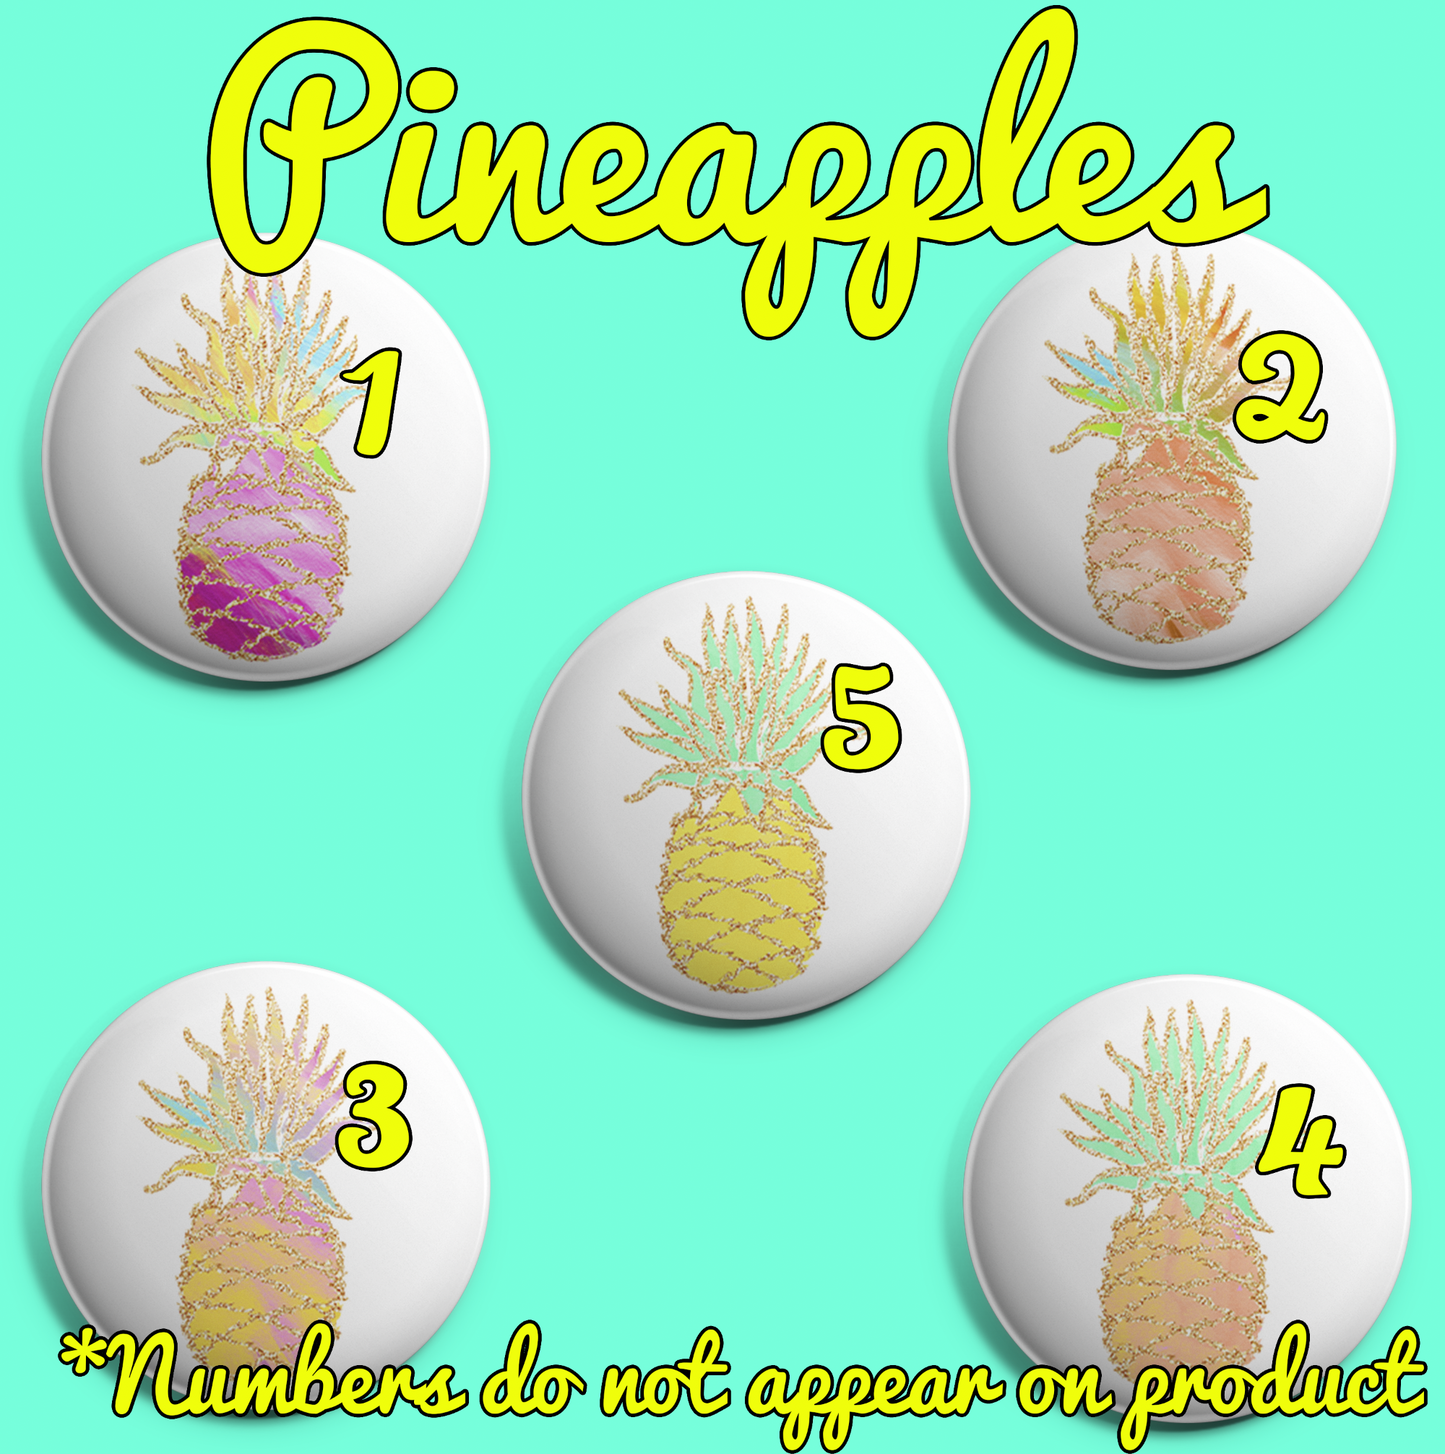 Pineapples - REBEL BUTTONS